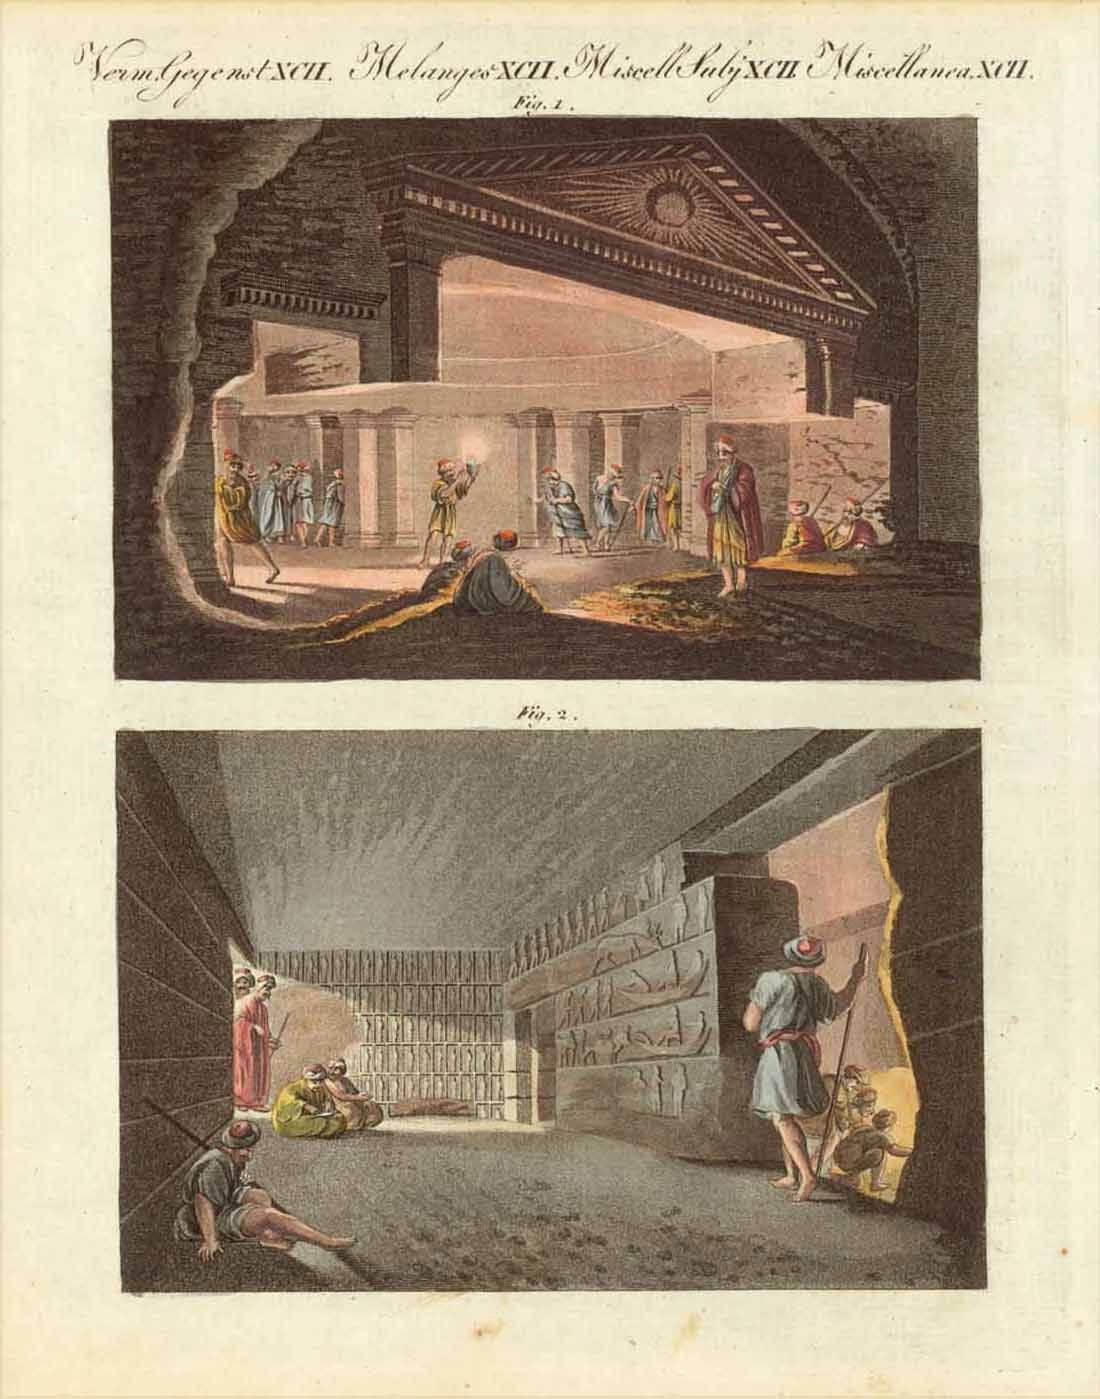 Upper image; "Katakomben in Alexandrien" Lower image: Untererdische Kammer bei den Pyramiden von Ghize"  Original antique print   Hand-colored copper engraving published 1807.  Included is a page of text in German and another in Italian about these archeological sites.